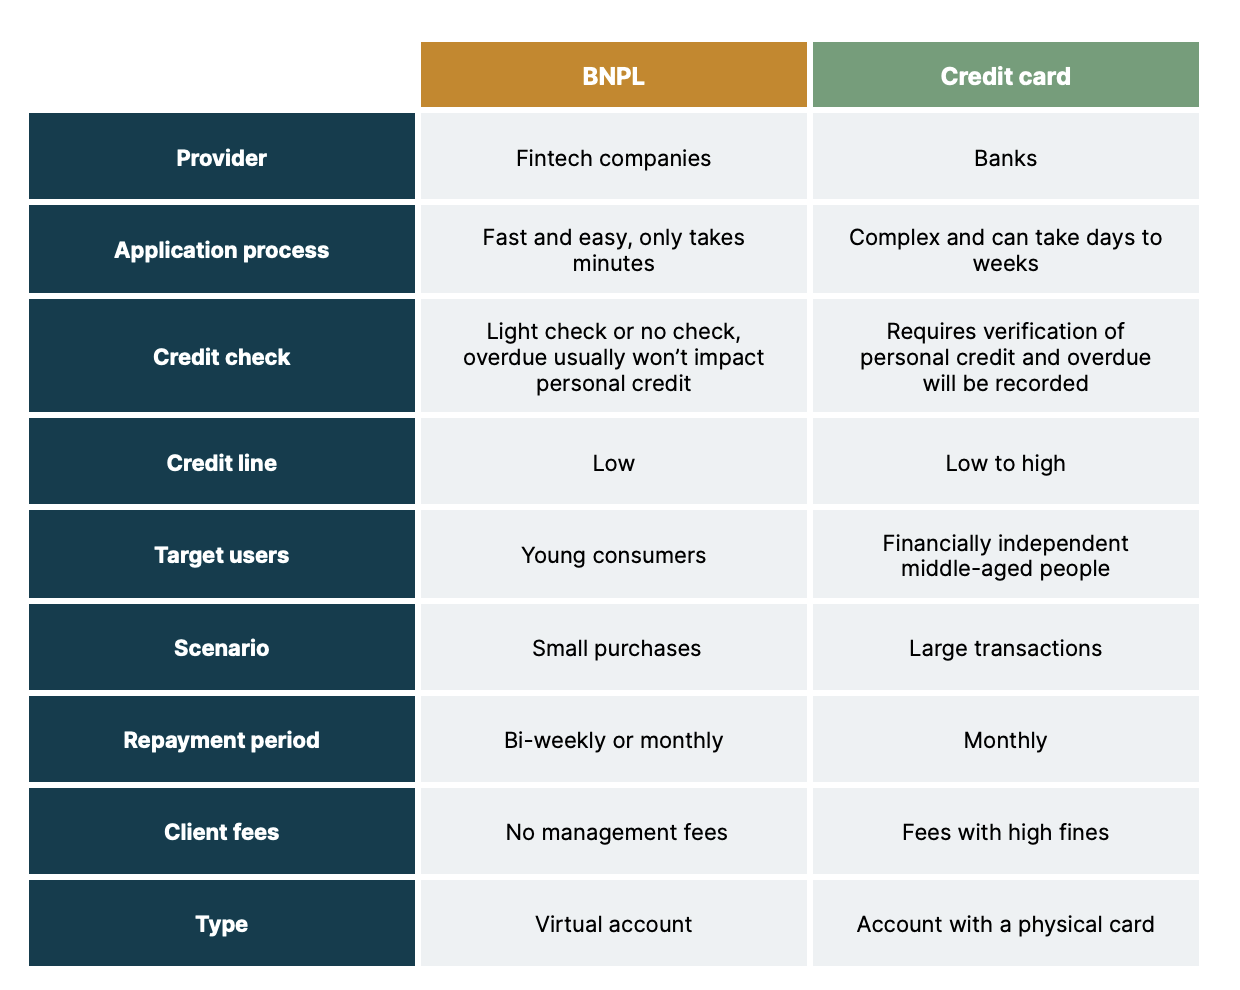 Differences between BNPL and credit cards